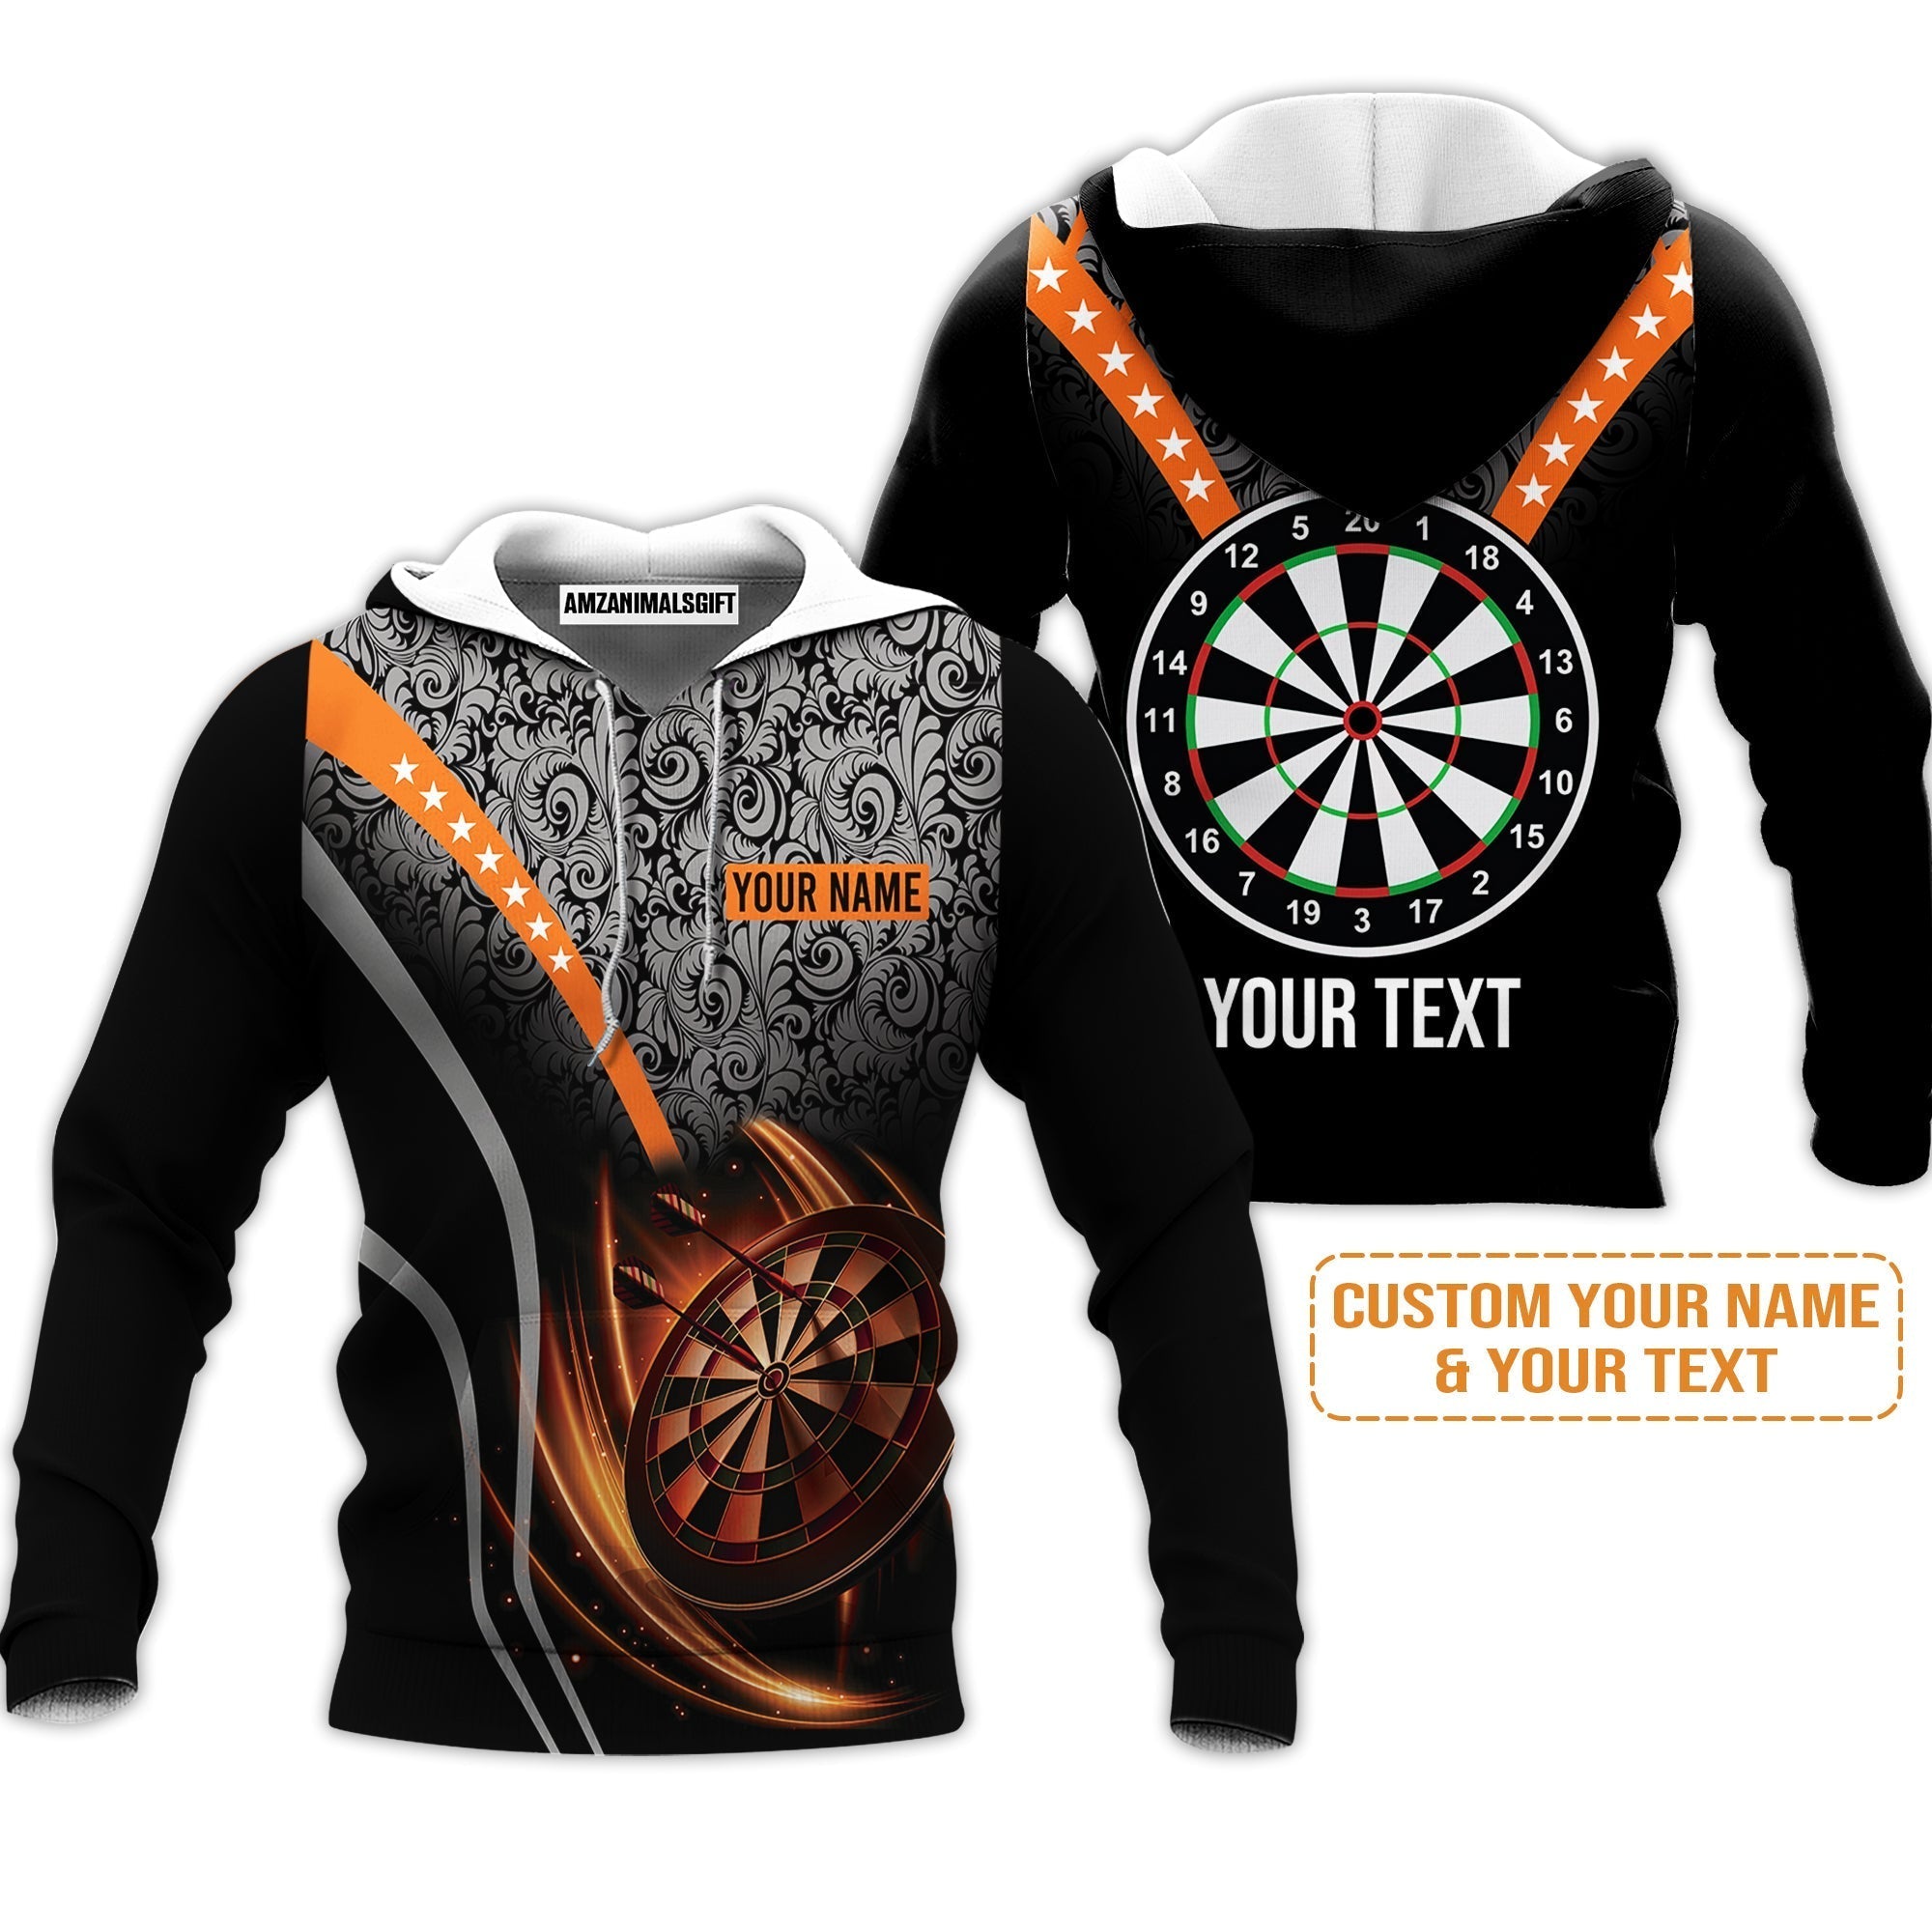 Customized Name & Text Darts Hoodie, Personalized Name Dartboard Orange Hoodie - Gift For Darts Players